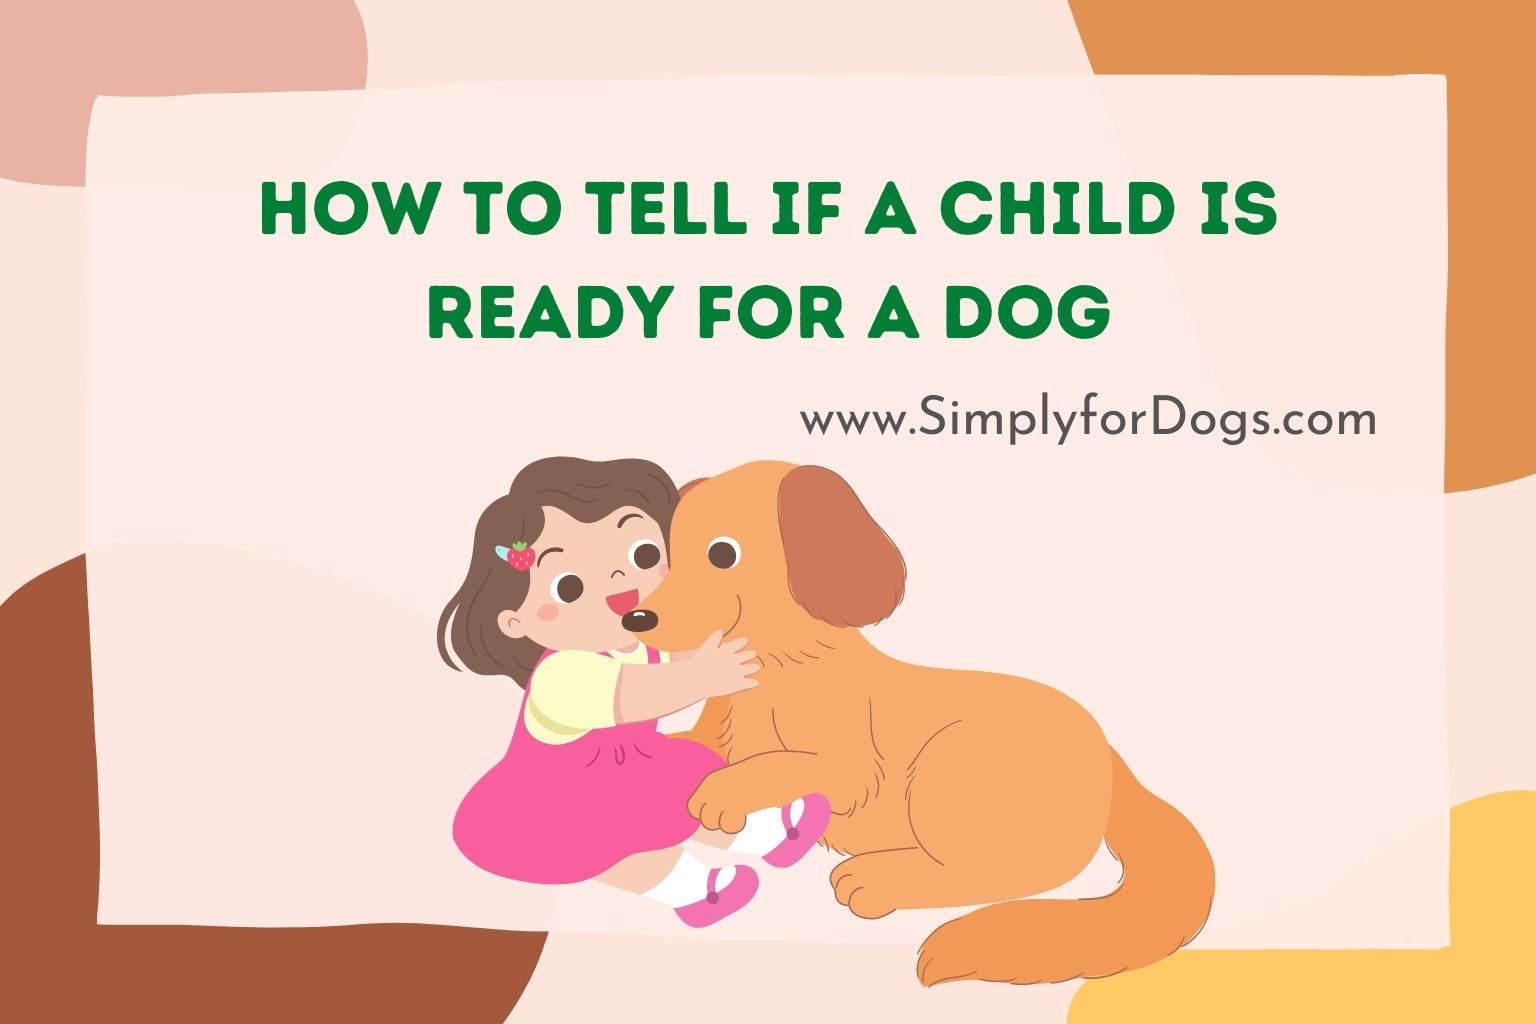 How To Tell if a Child is Ready for a Dog